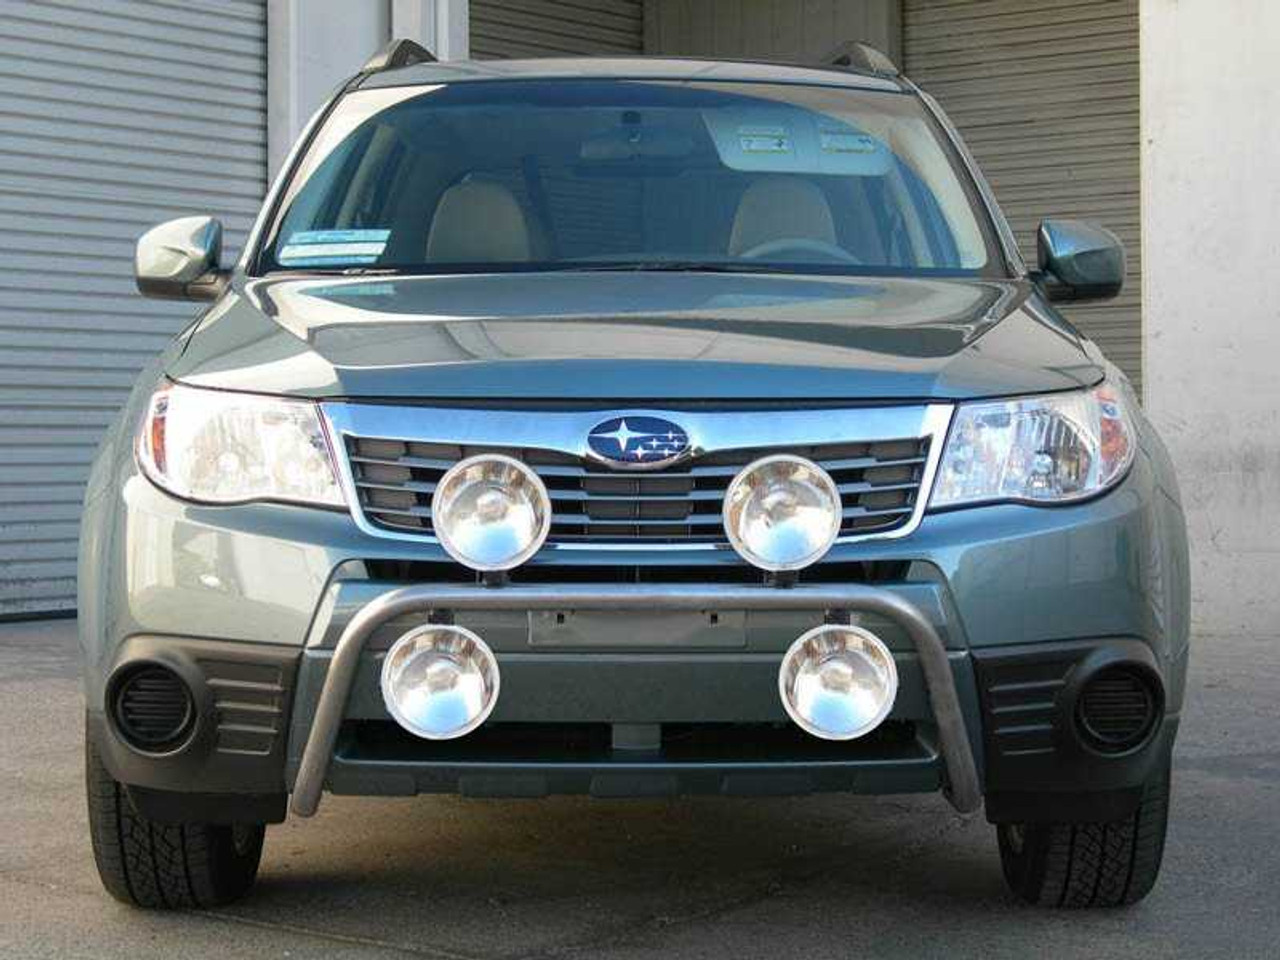 Auxiliary Off Road Driving Light Bumper Lamps for Subaru Forester